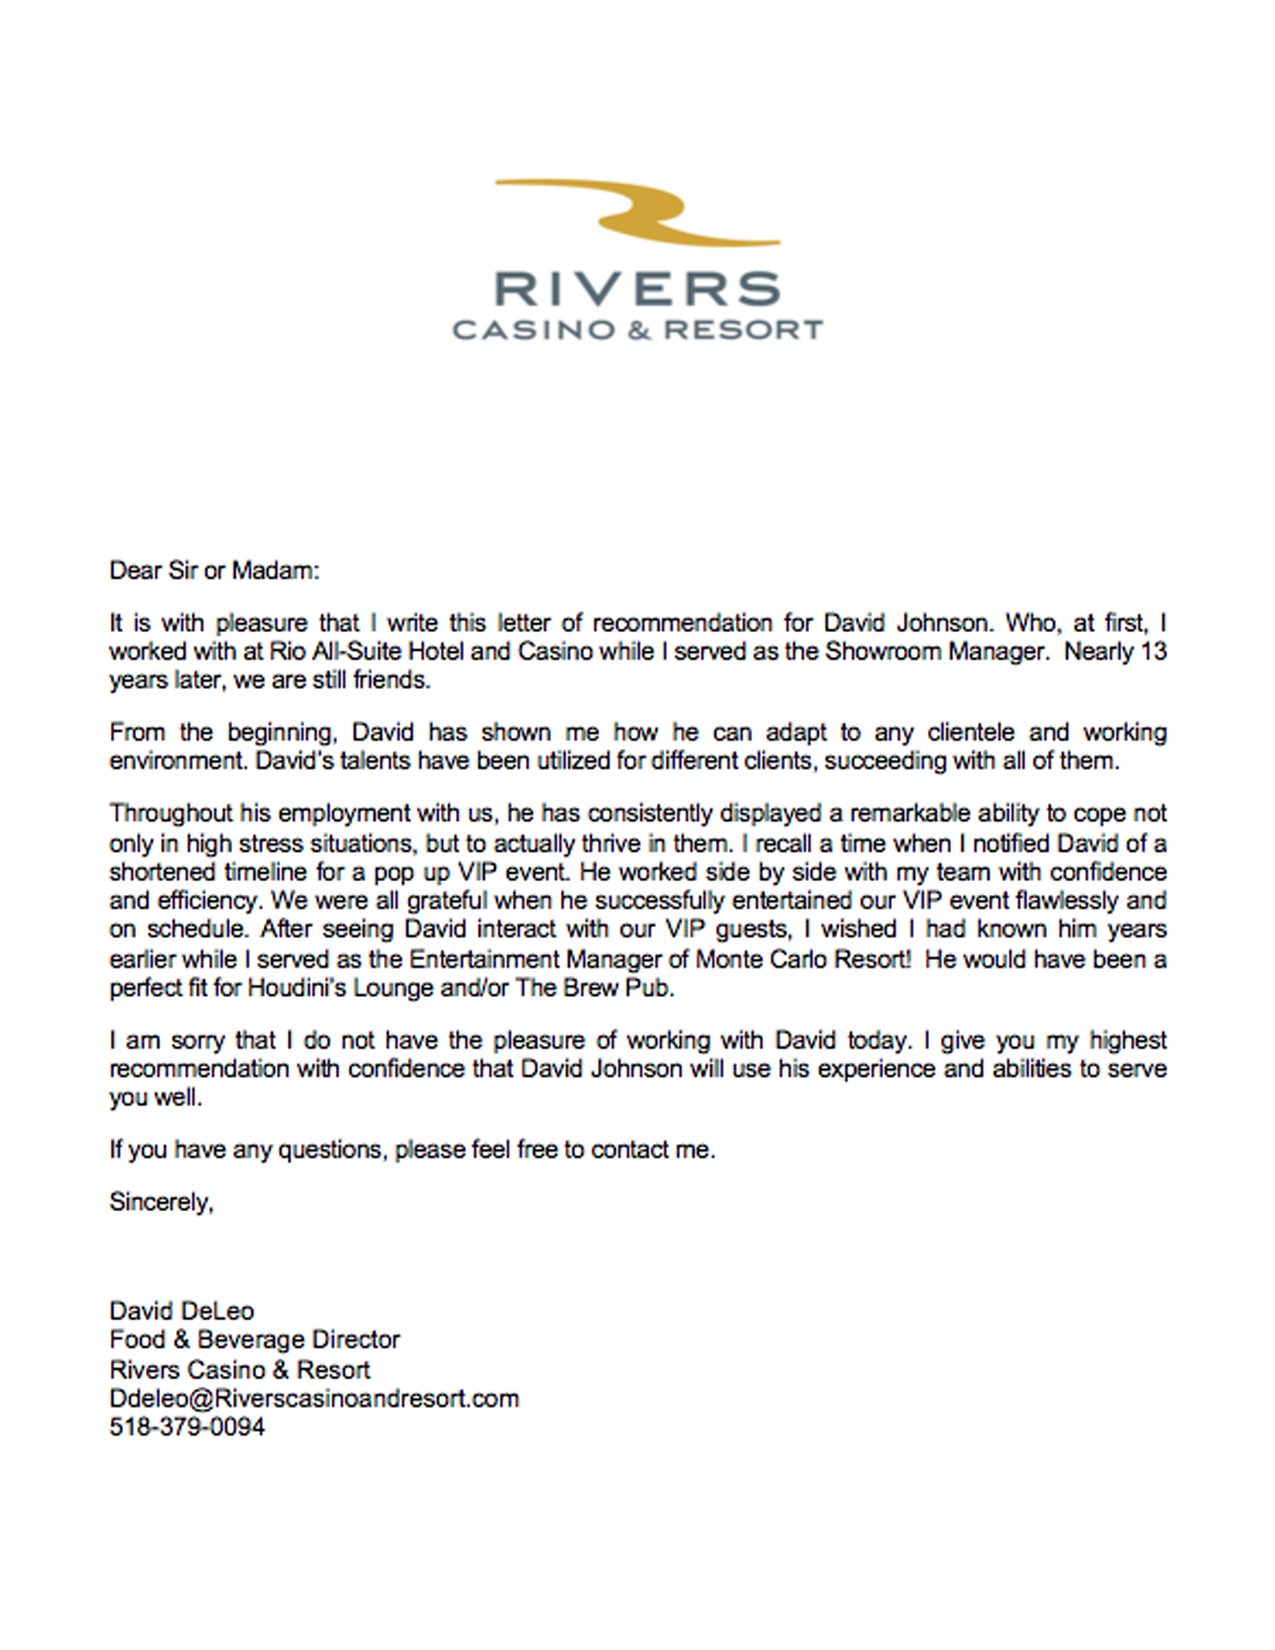 rivers letter